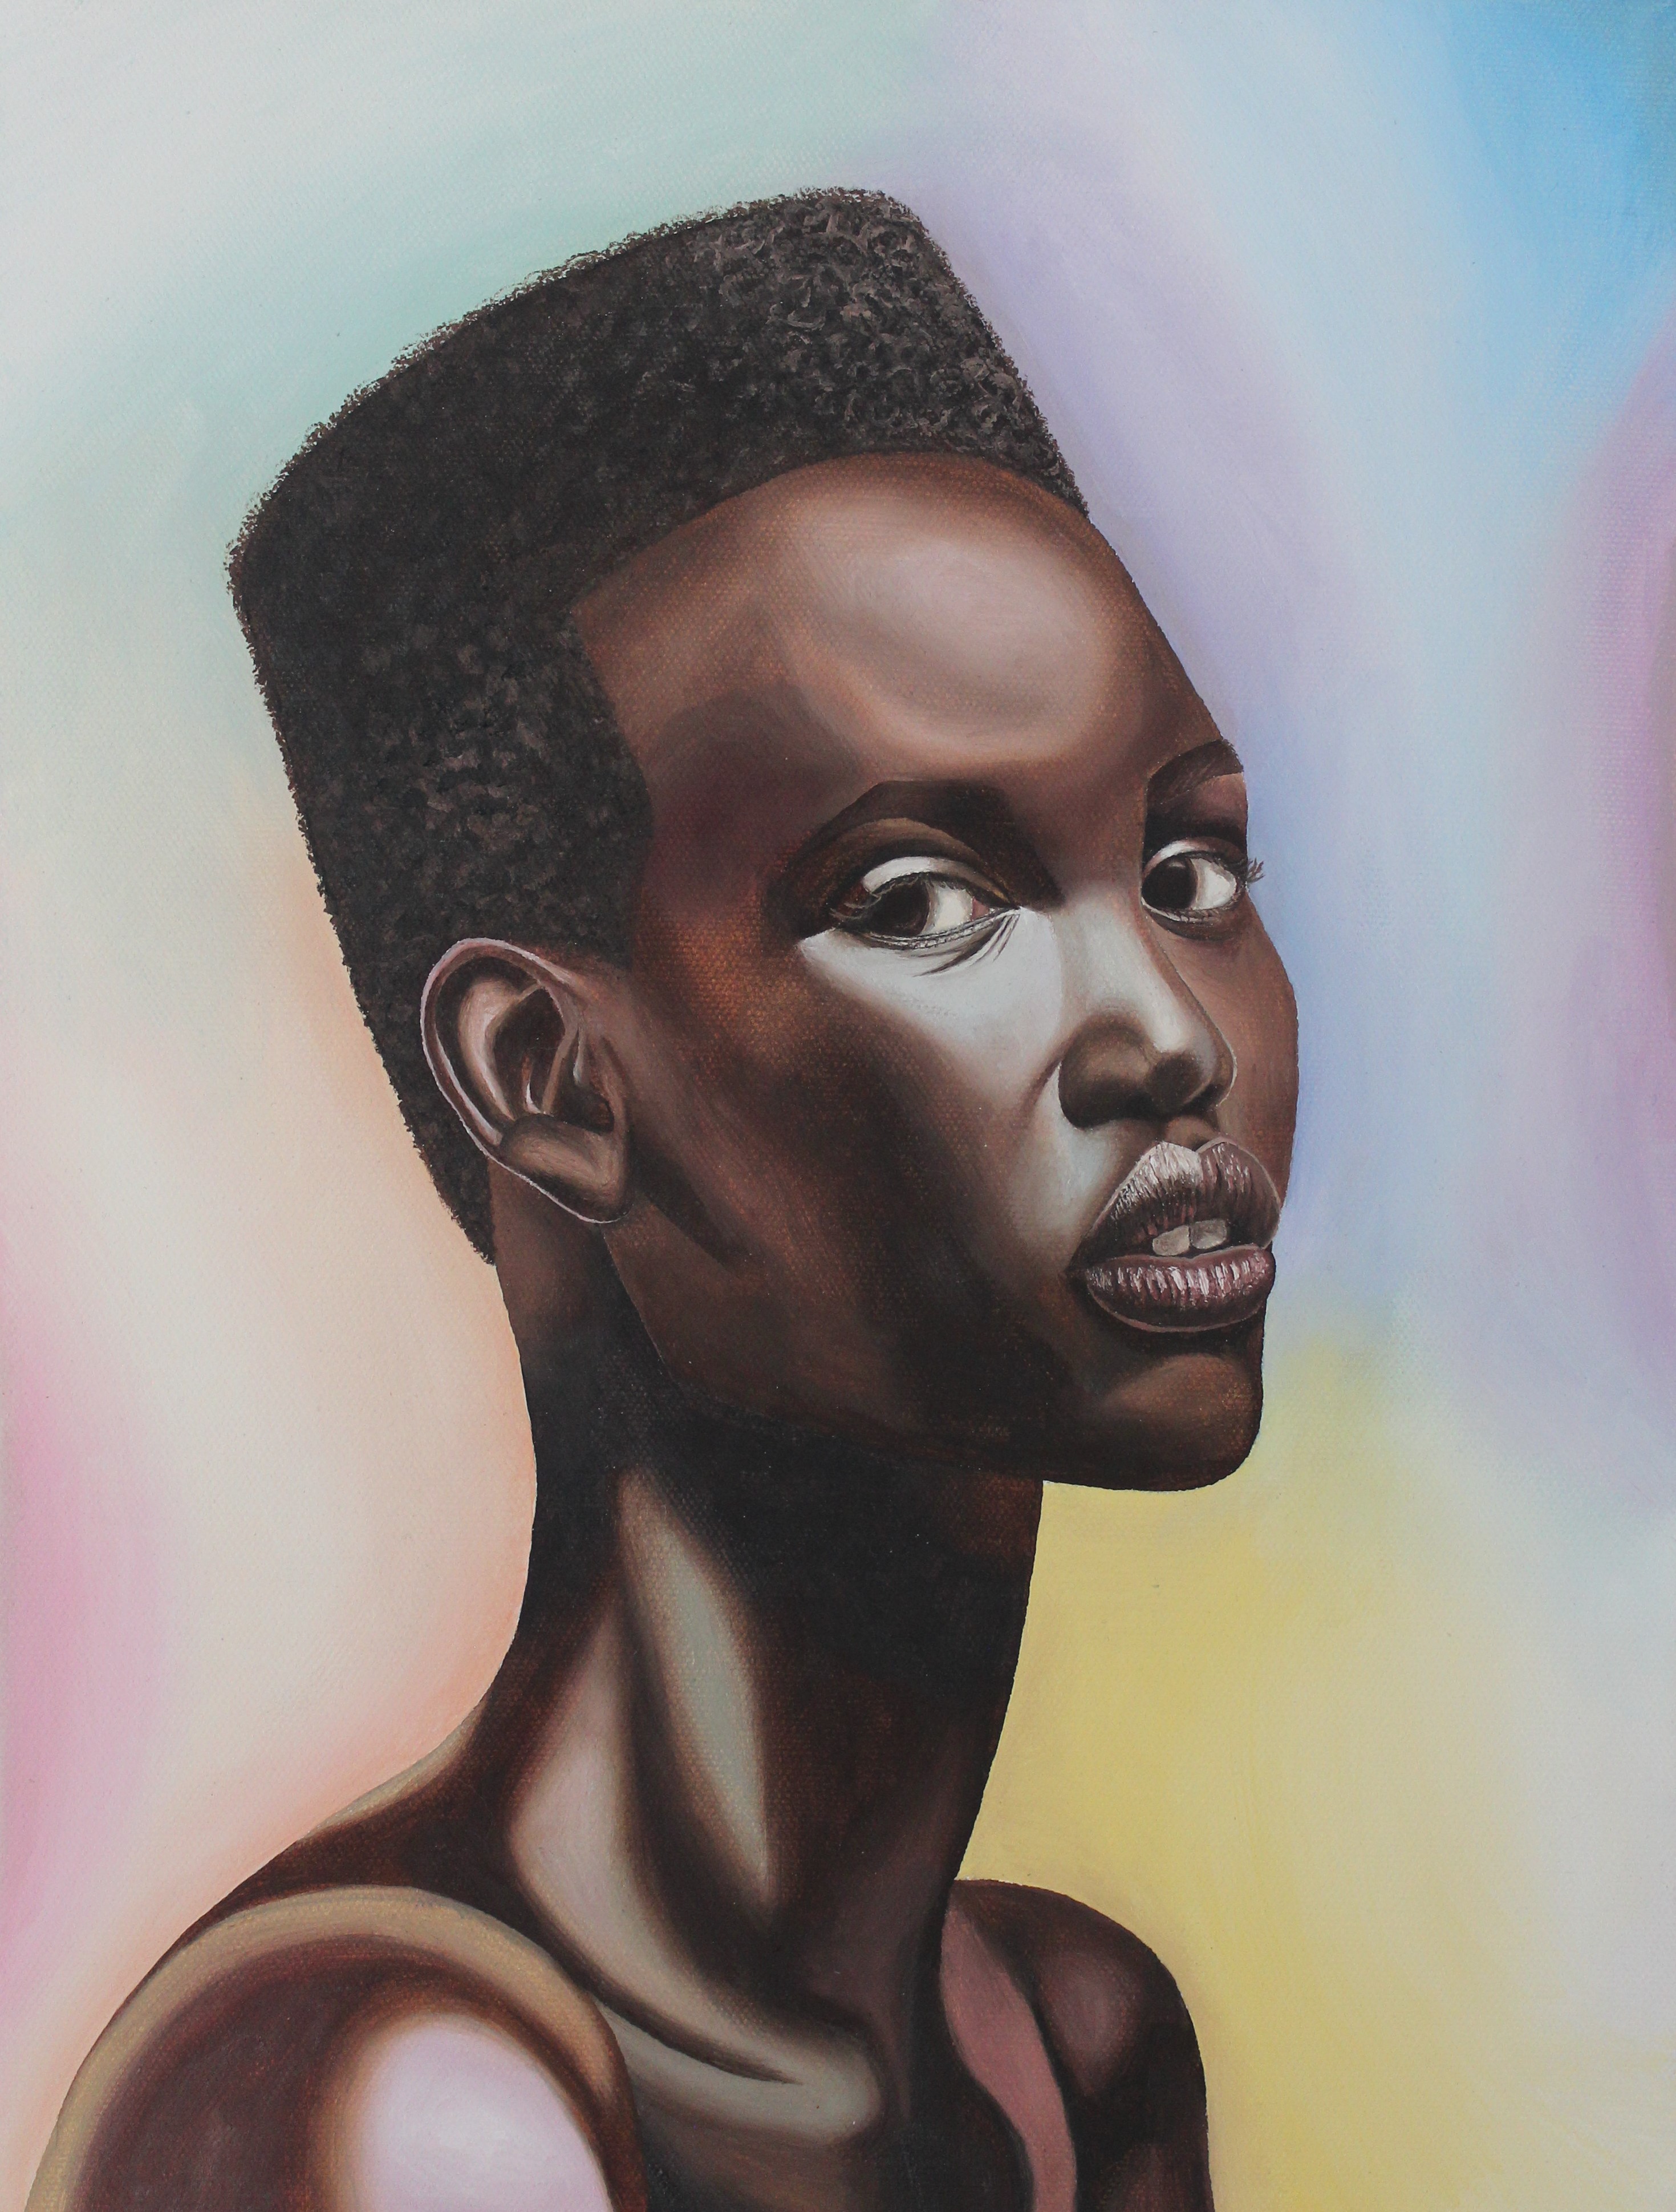 Portrait of African American person from shoulders up with pastel color in background